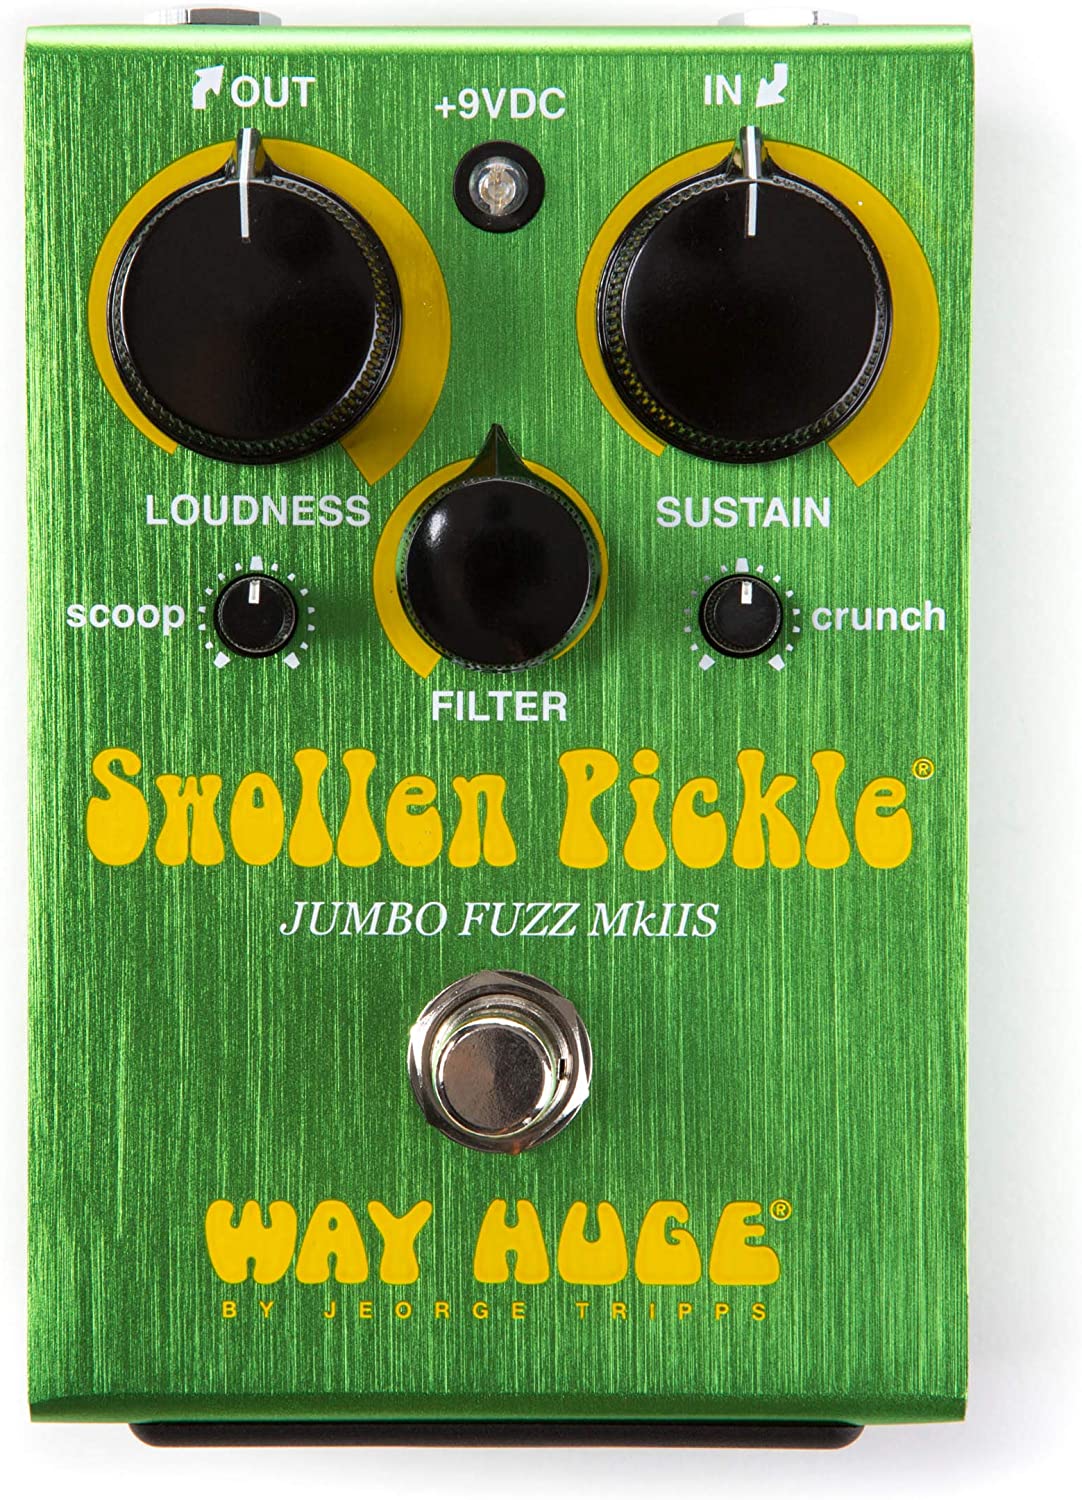 Way Huge Swollen Pickle Jumbo Fuzz Pedal on a white background